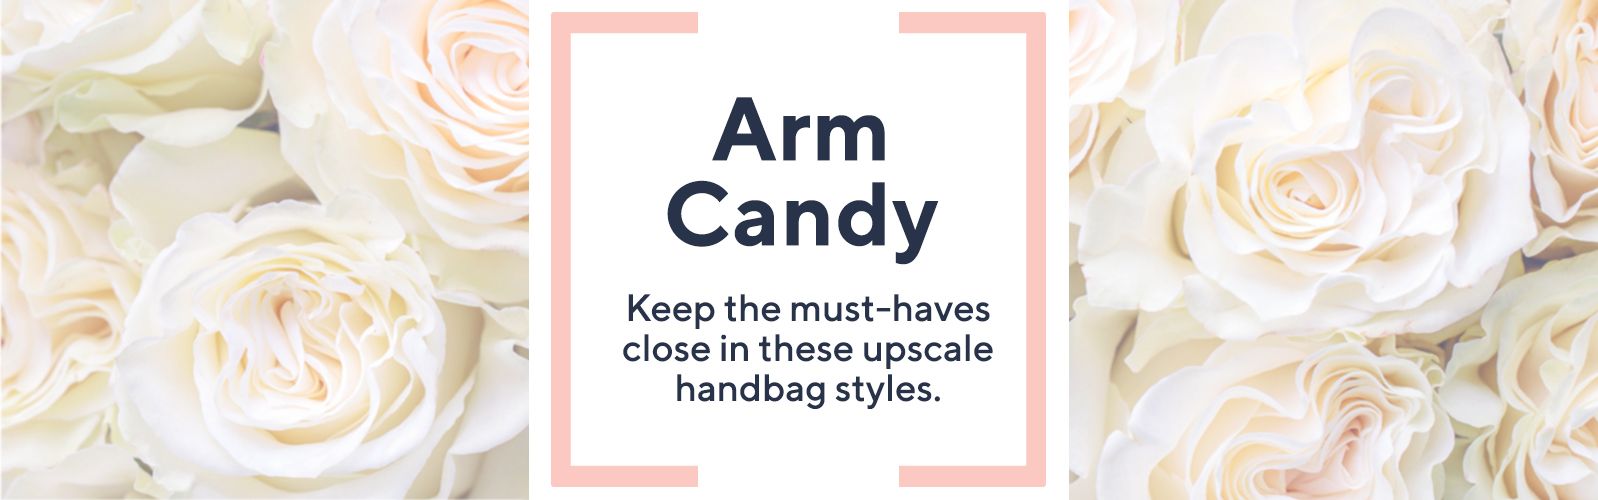 Arm Candy.  Keep the must-haves close in these upscale handbag styles.